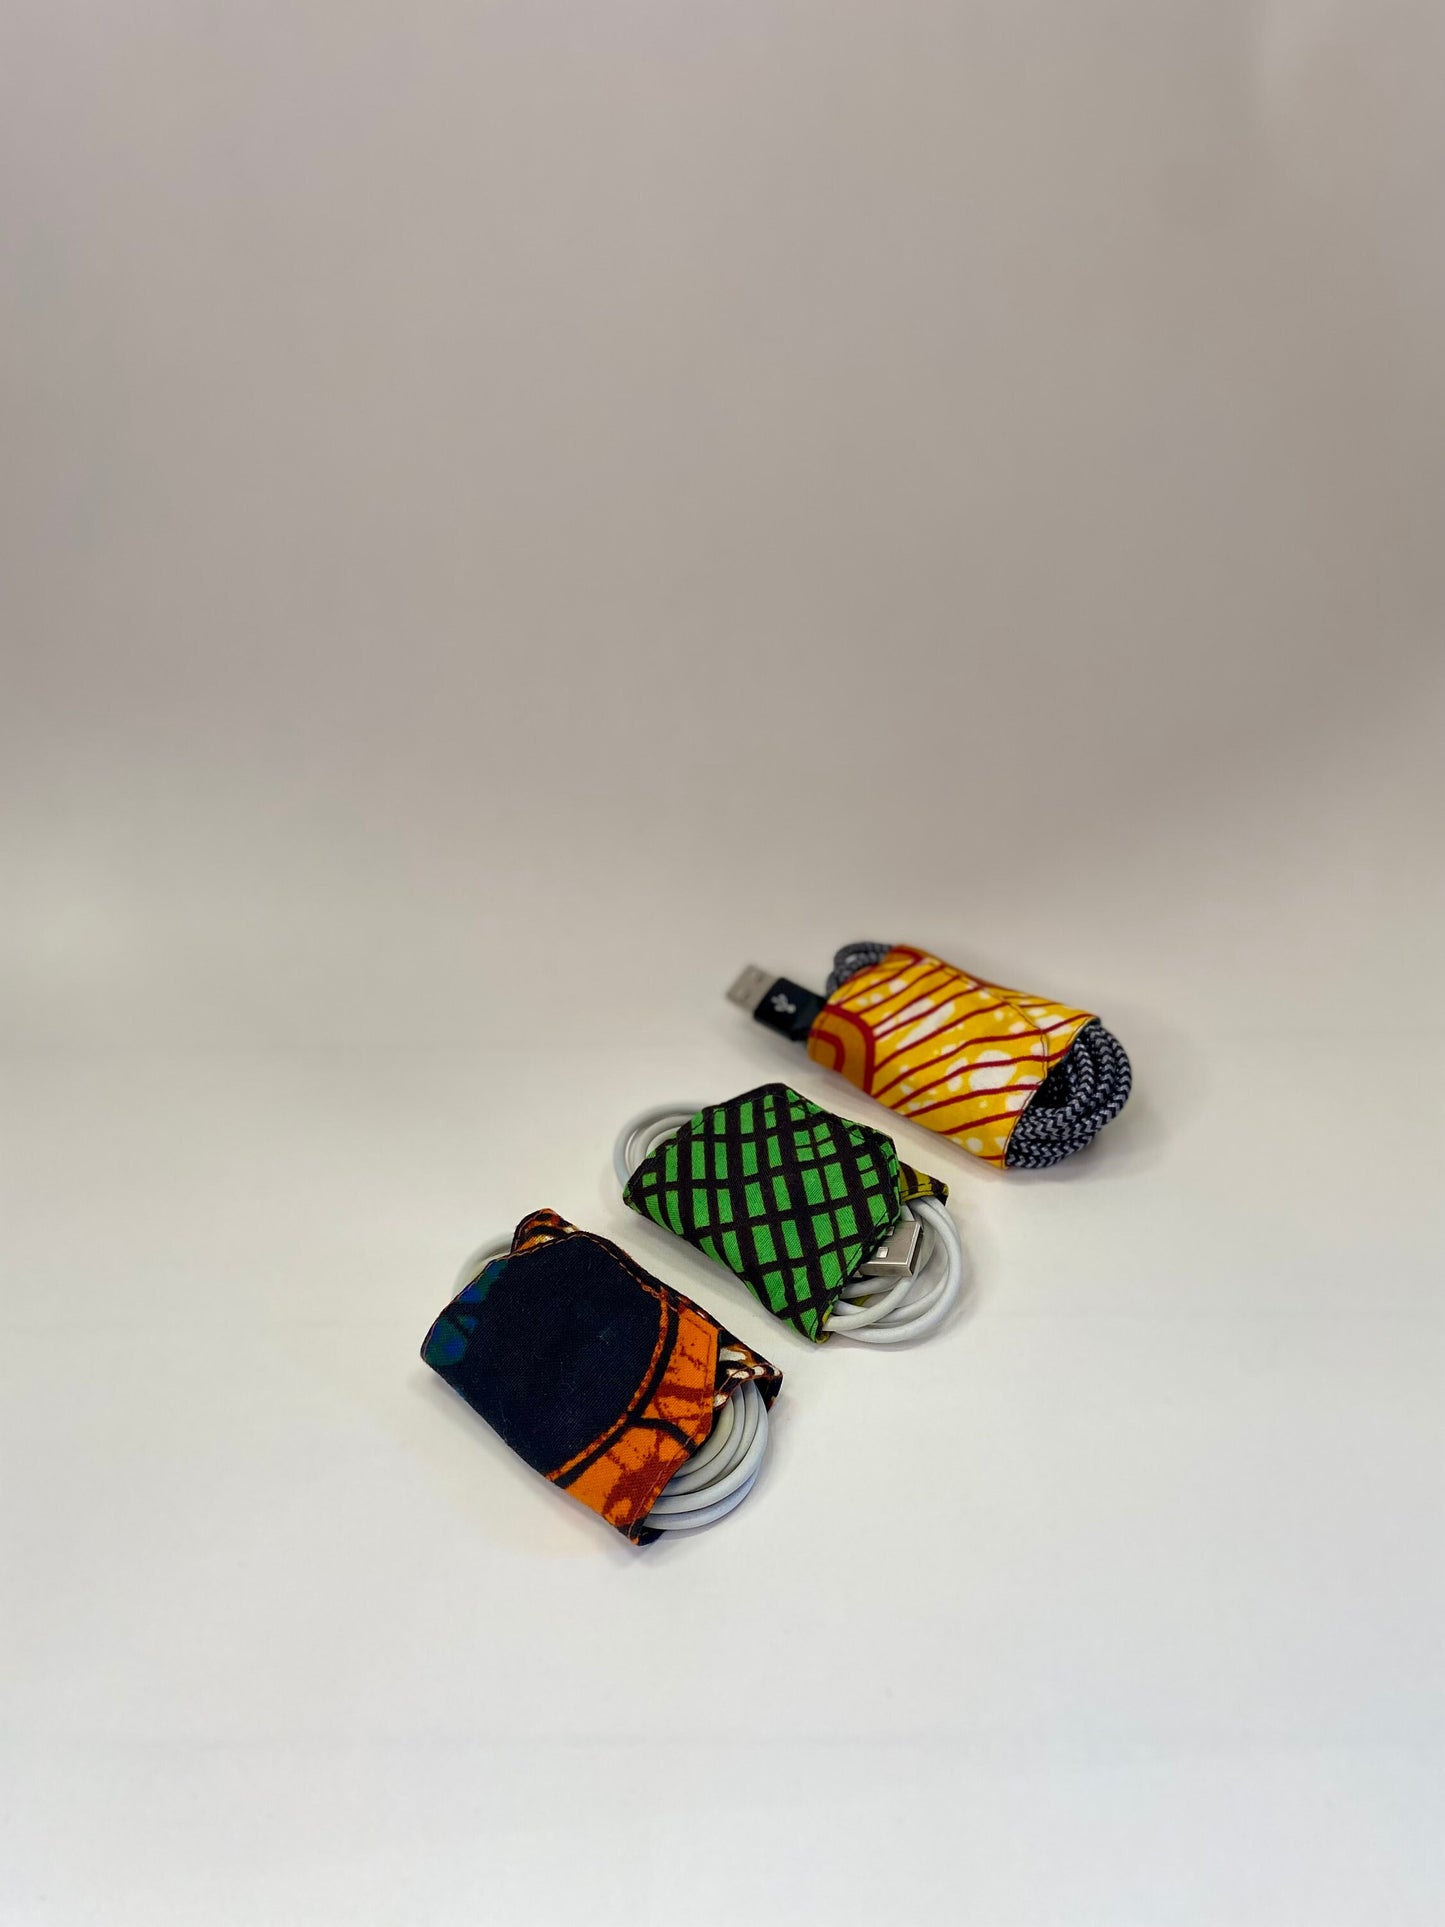 African Print Cable Organiser, Cable Tidy